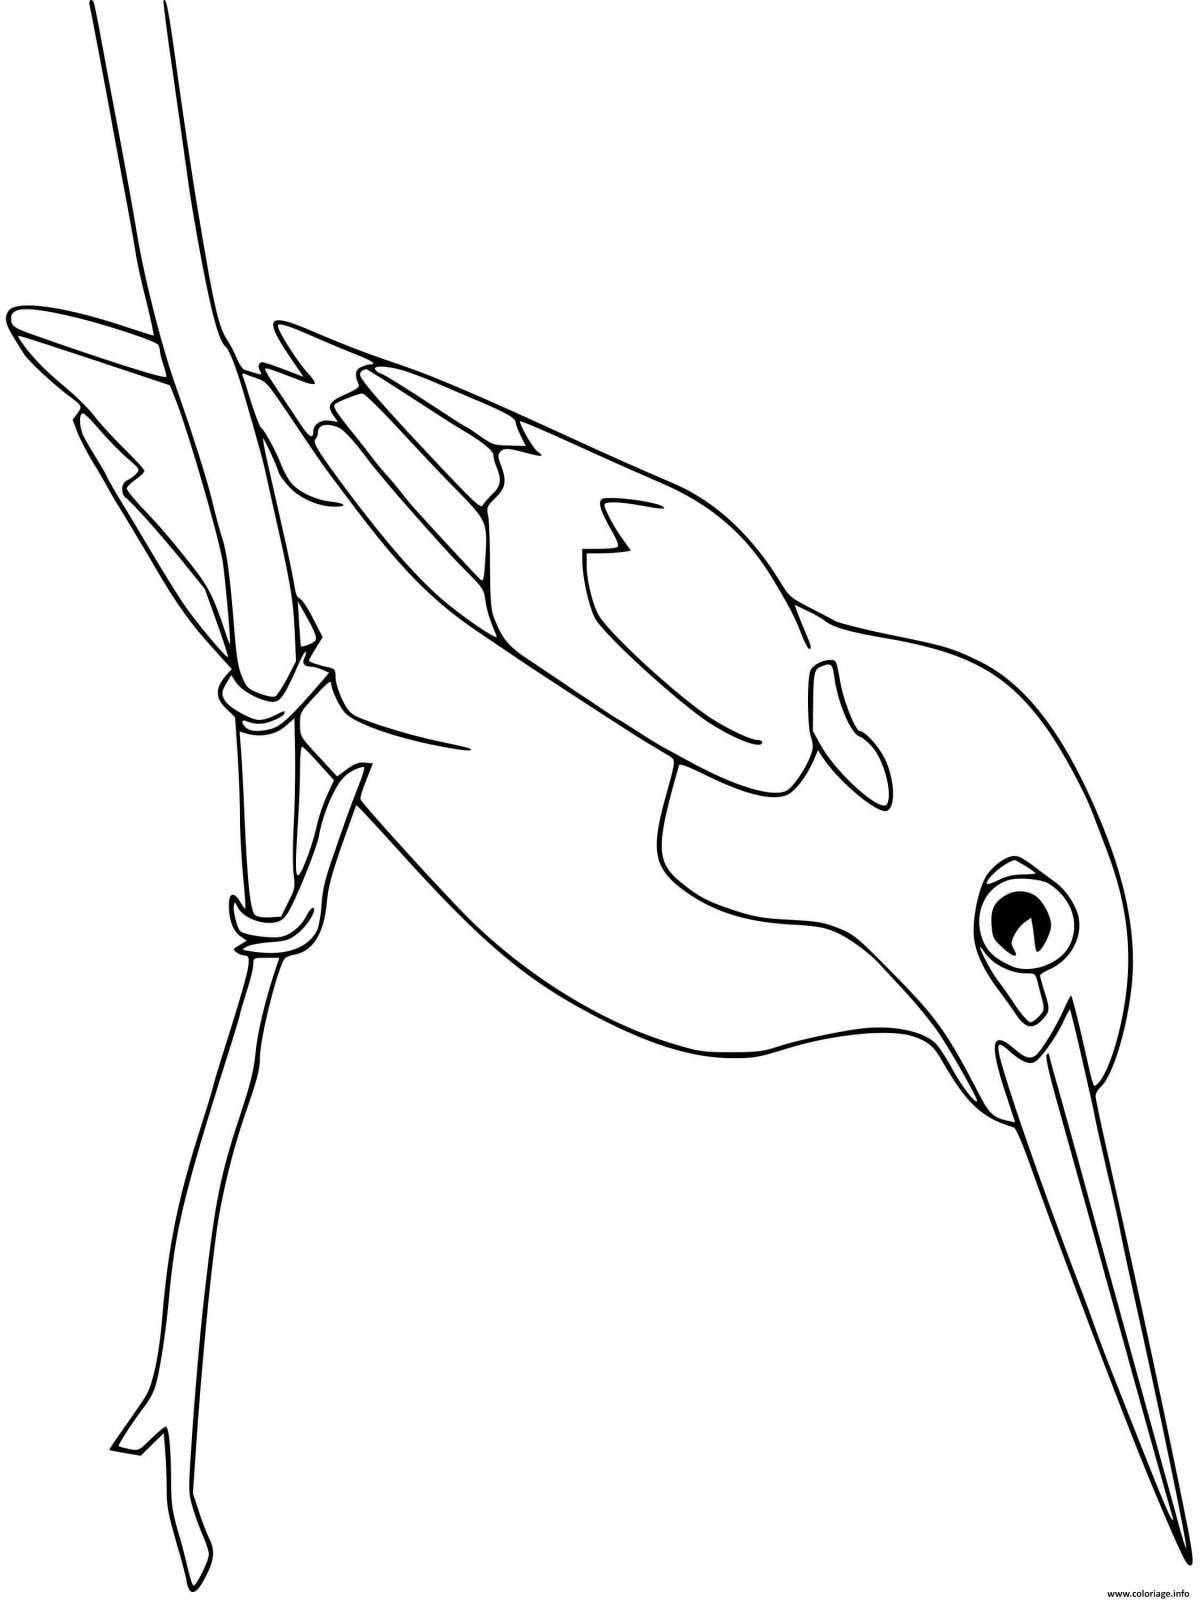 Coloring book playful kingfisher